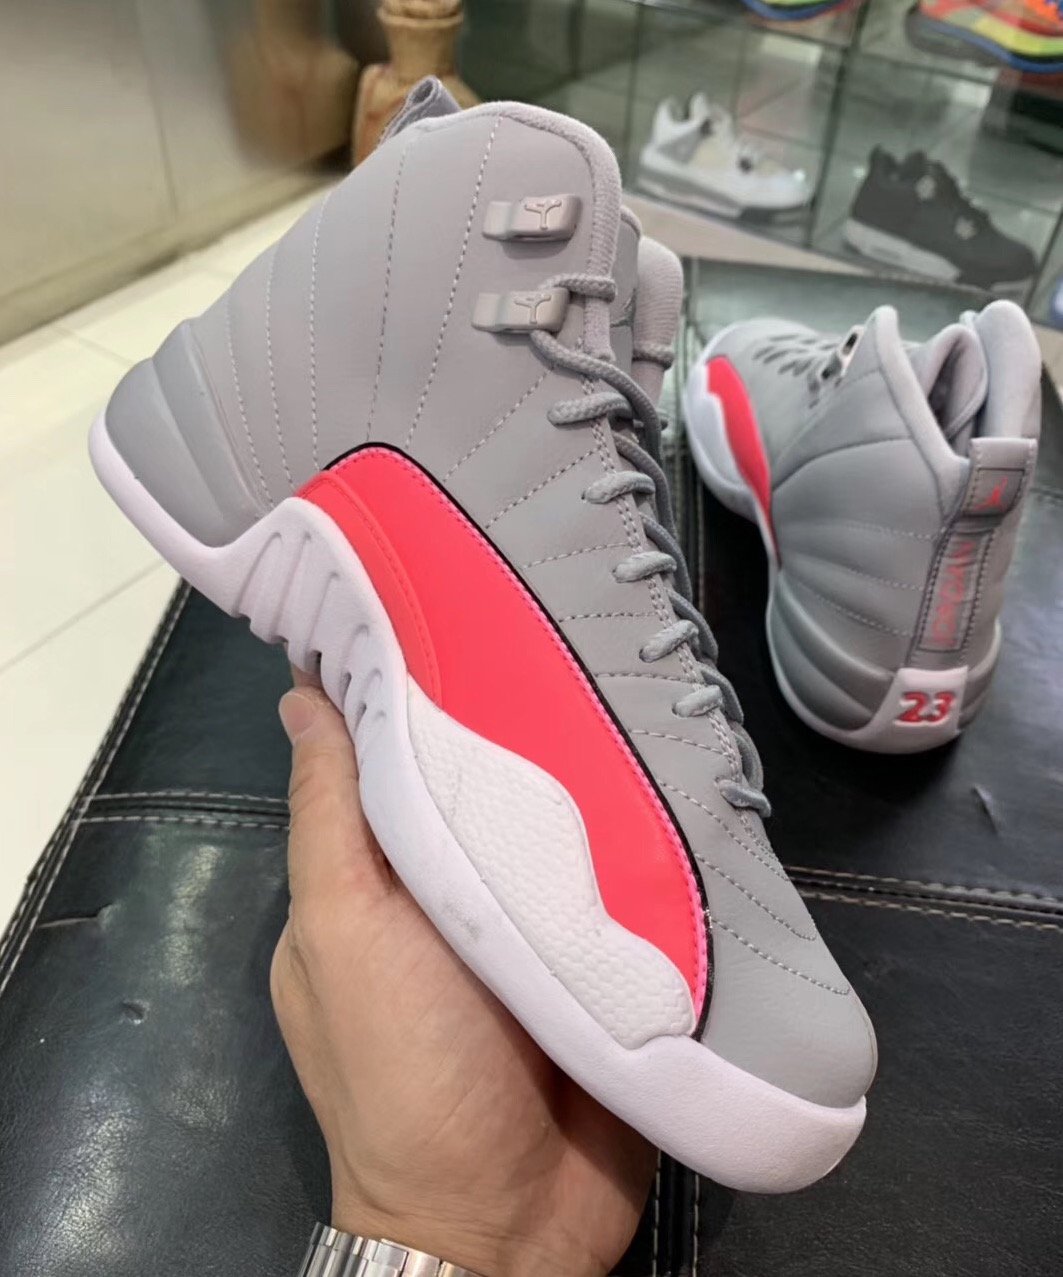 grey and pink 12s 2019